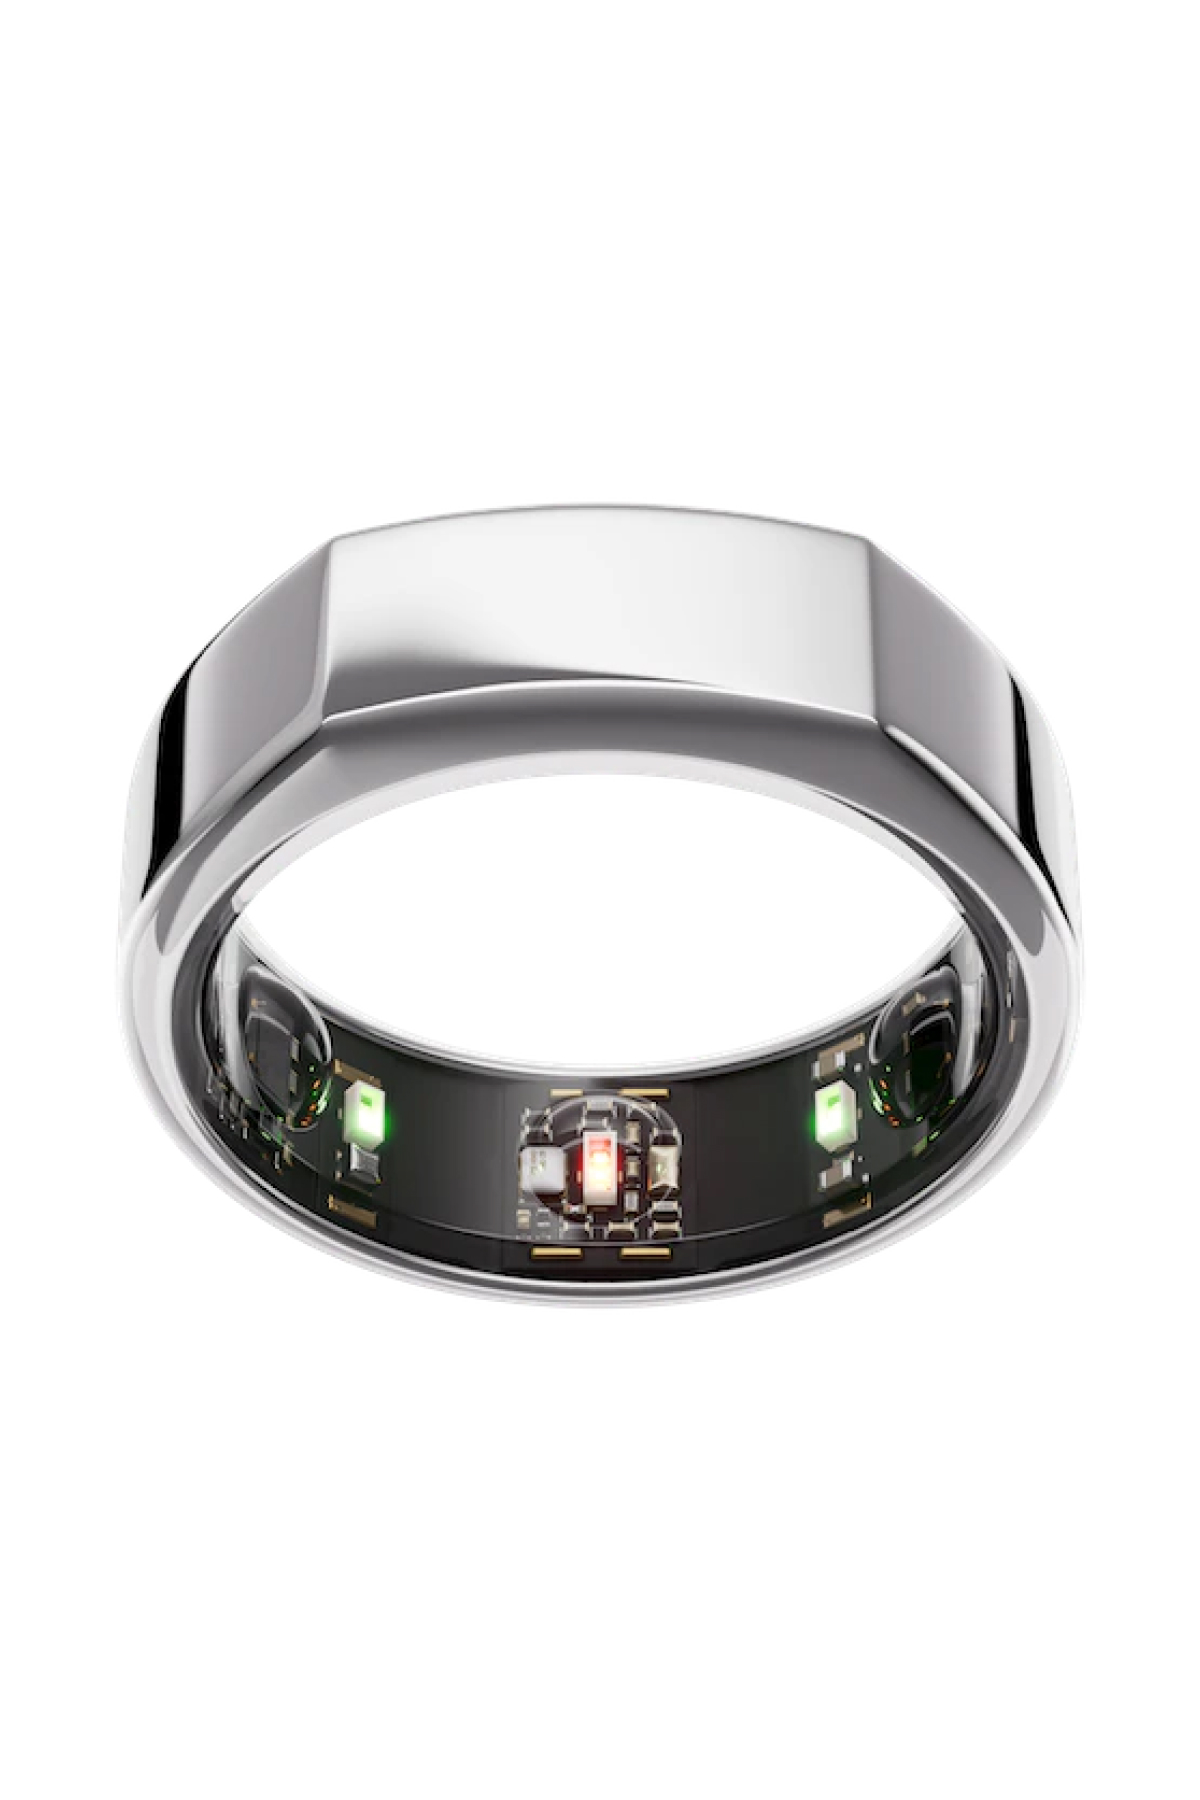 oura ring heritage silver